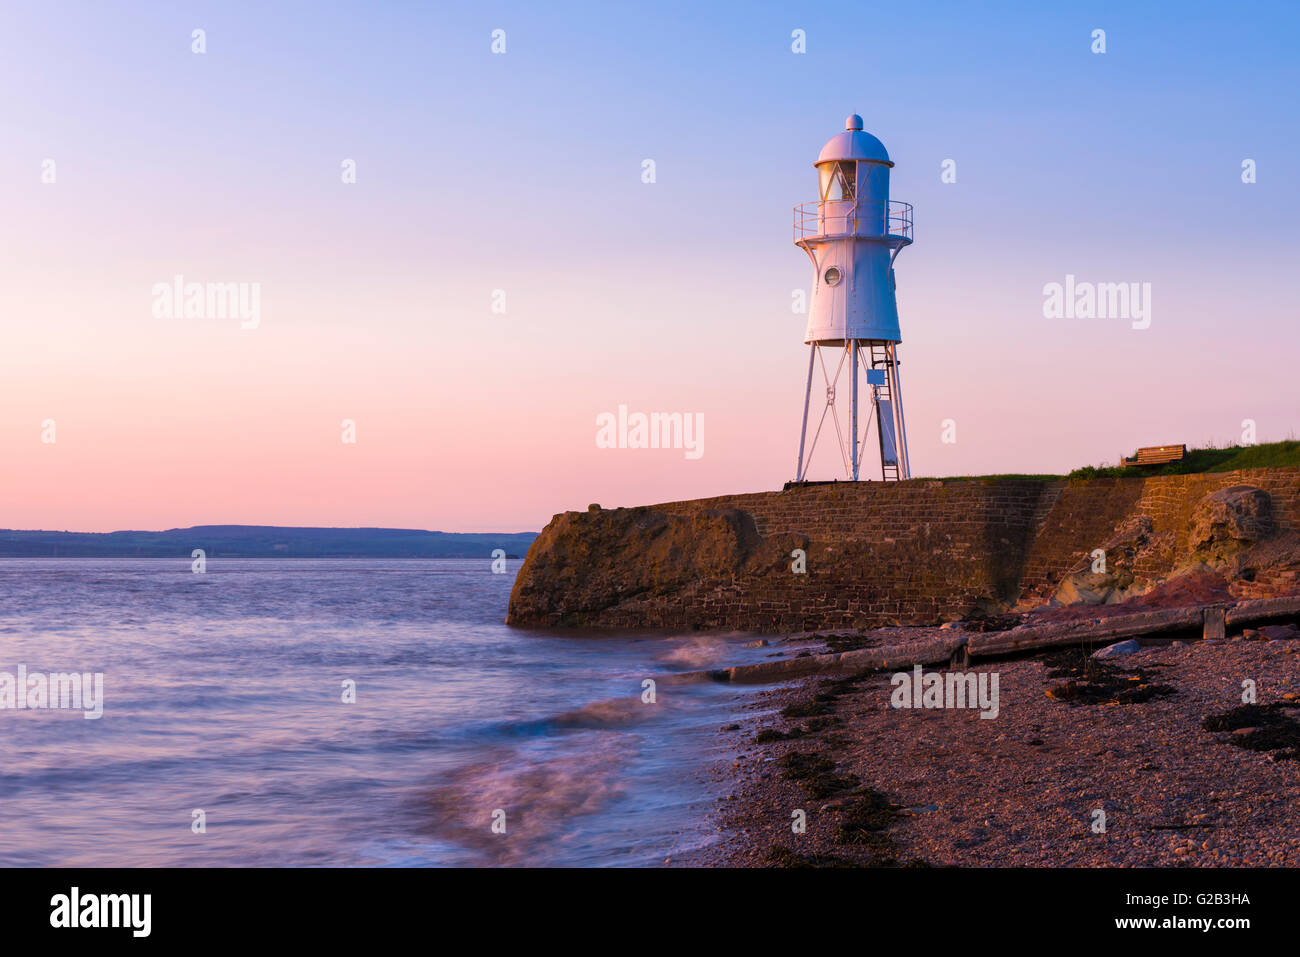 The Lighthouse overlooking the Severn Estuary at Black Nore, Portishead, North Somerset, England. Stock Photo